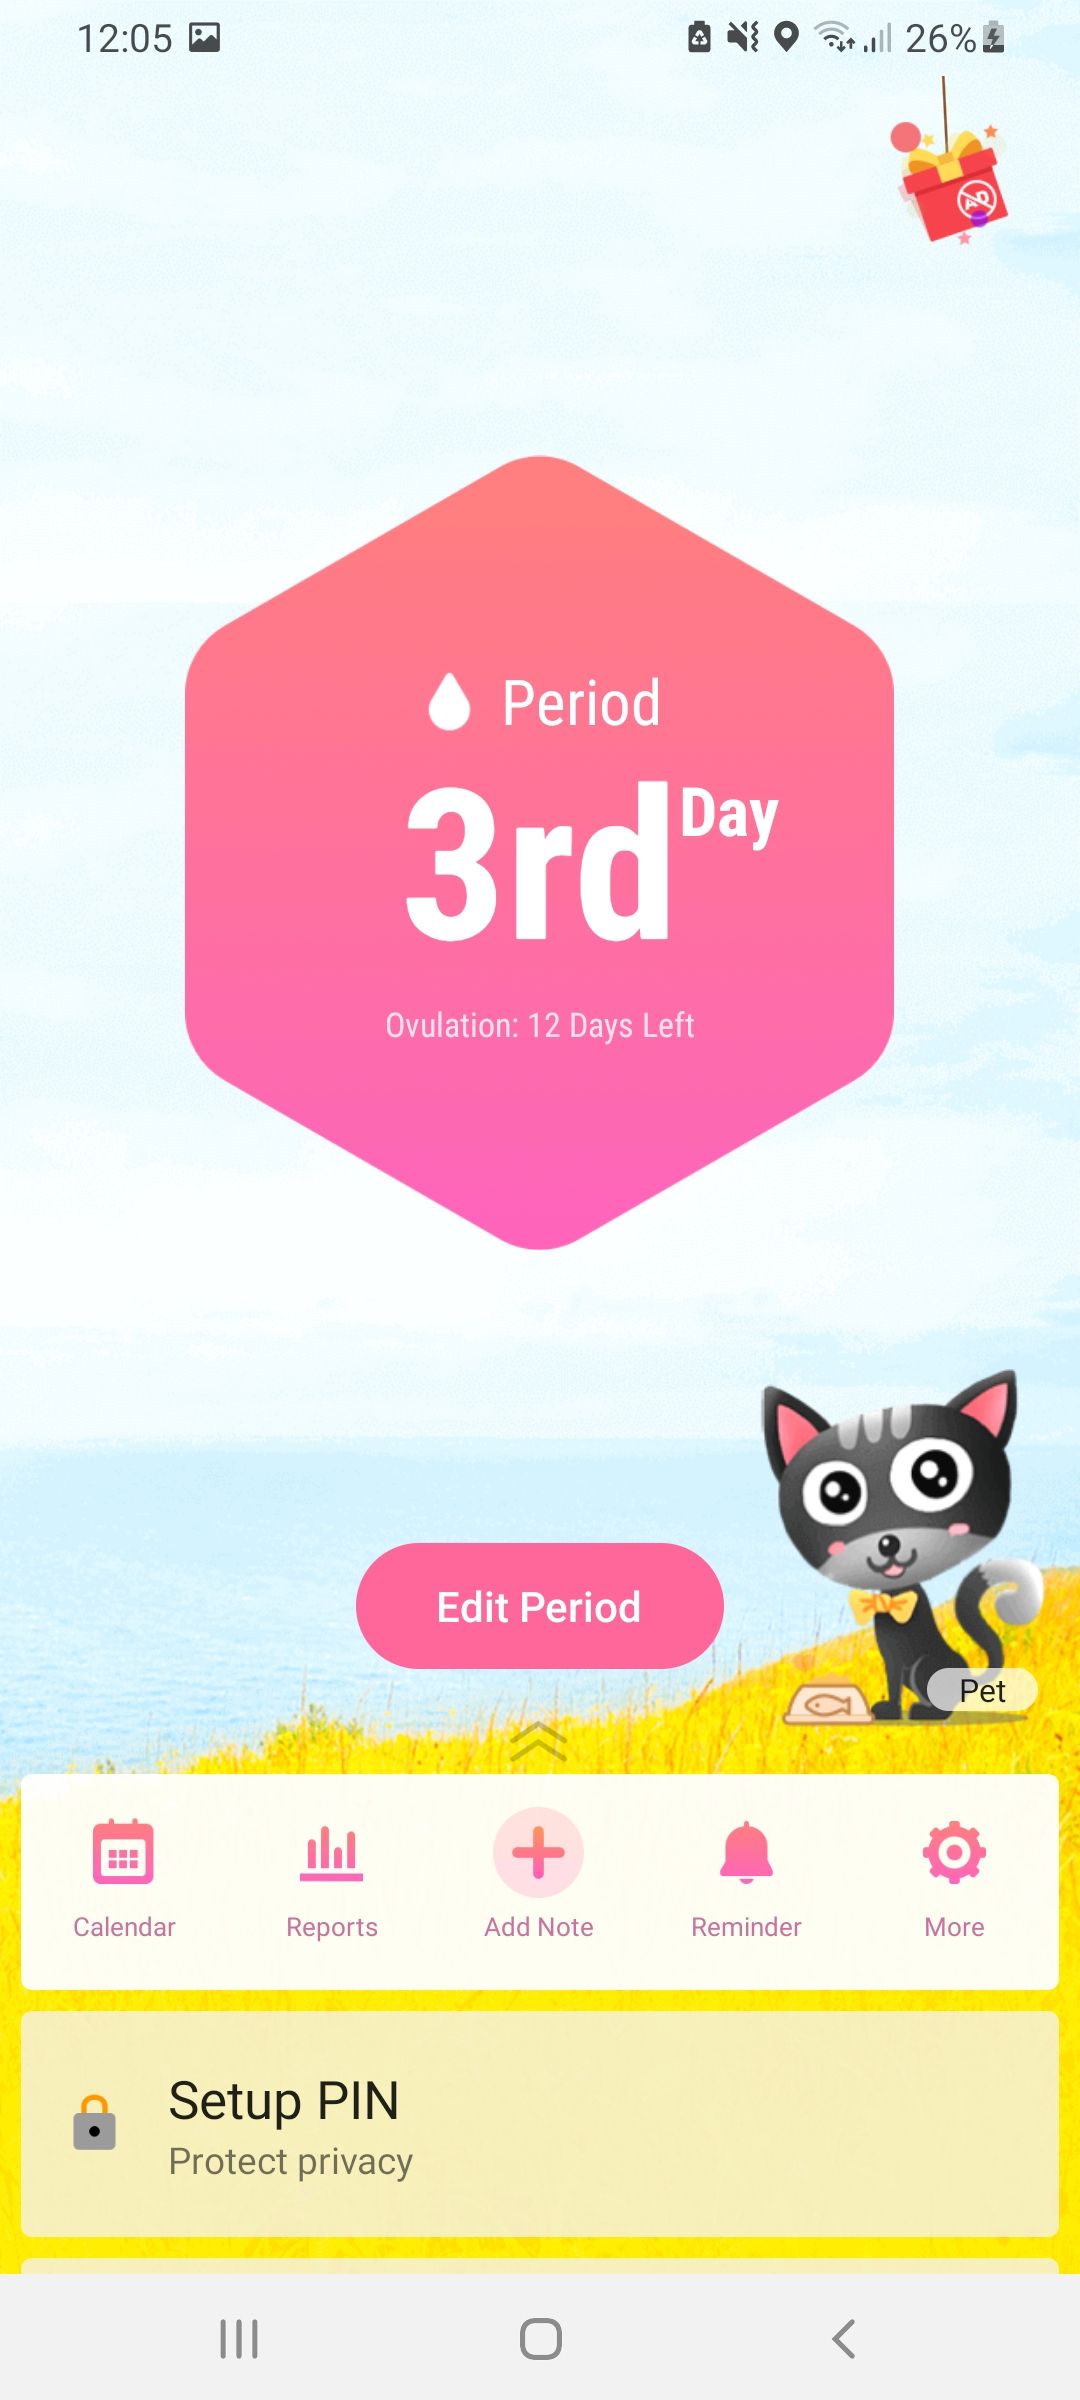 Home page of free Ovulation and period tracking app